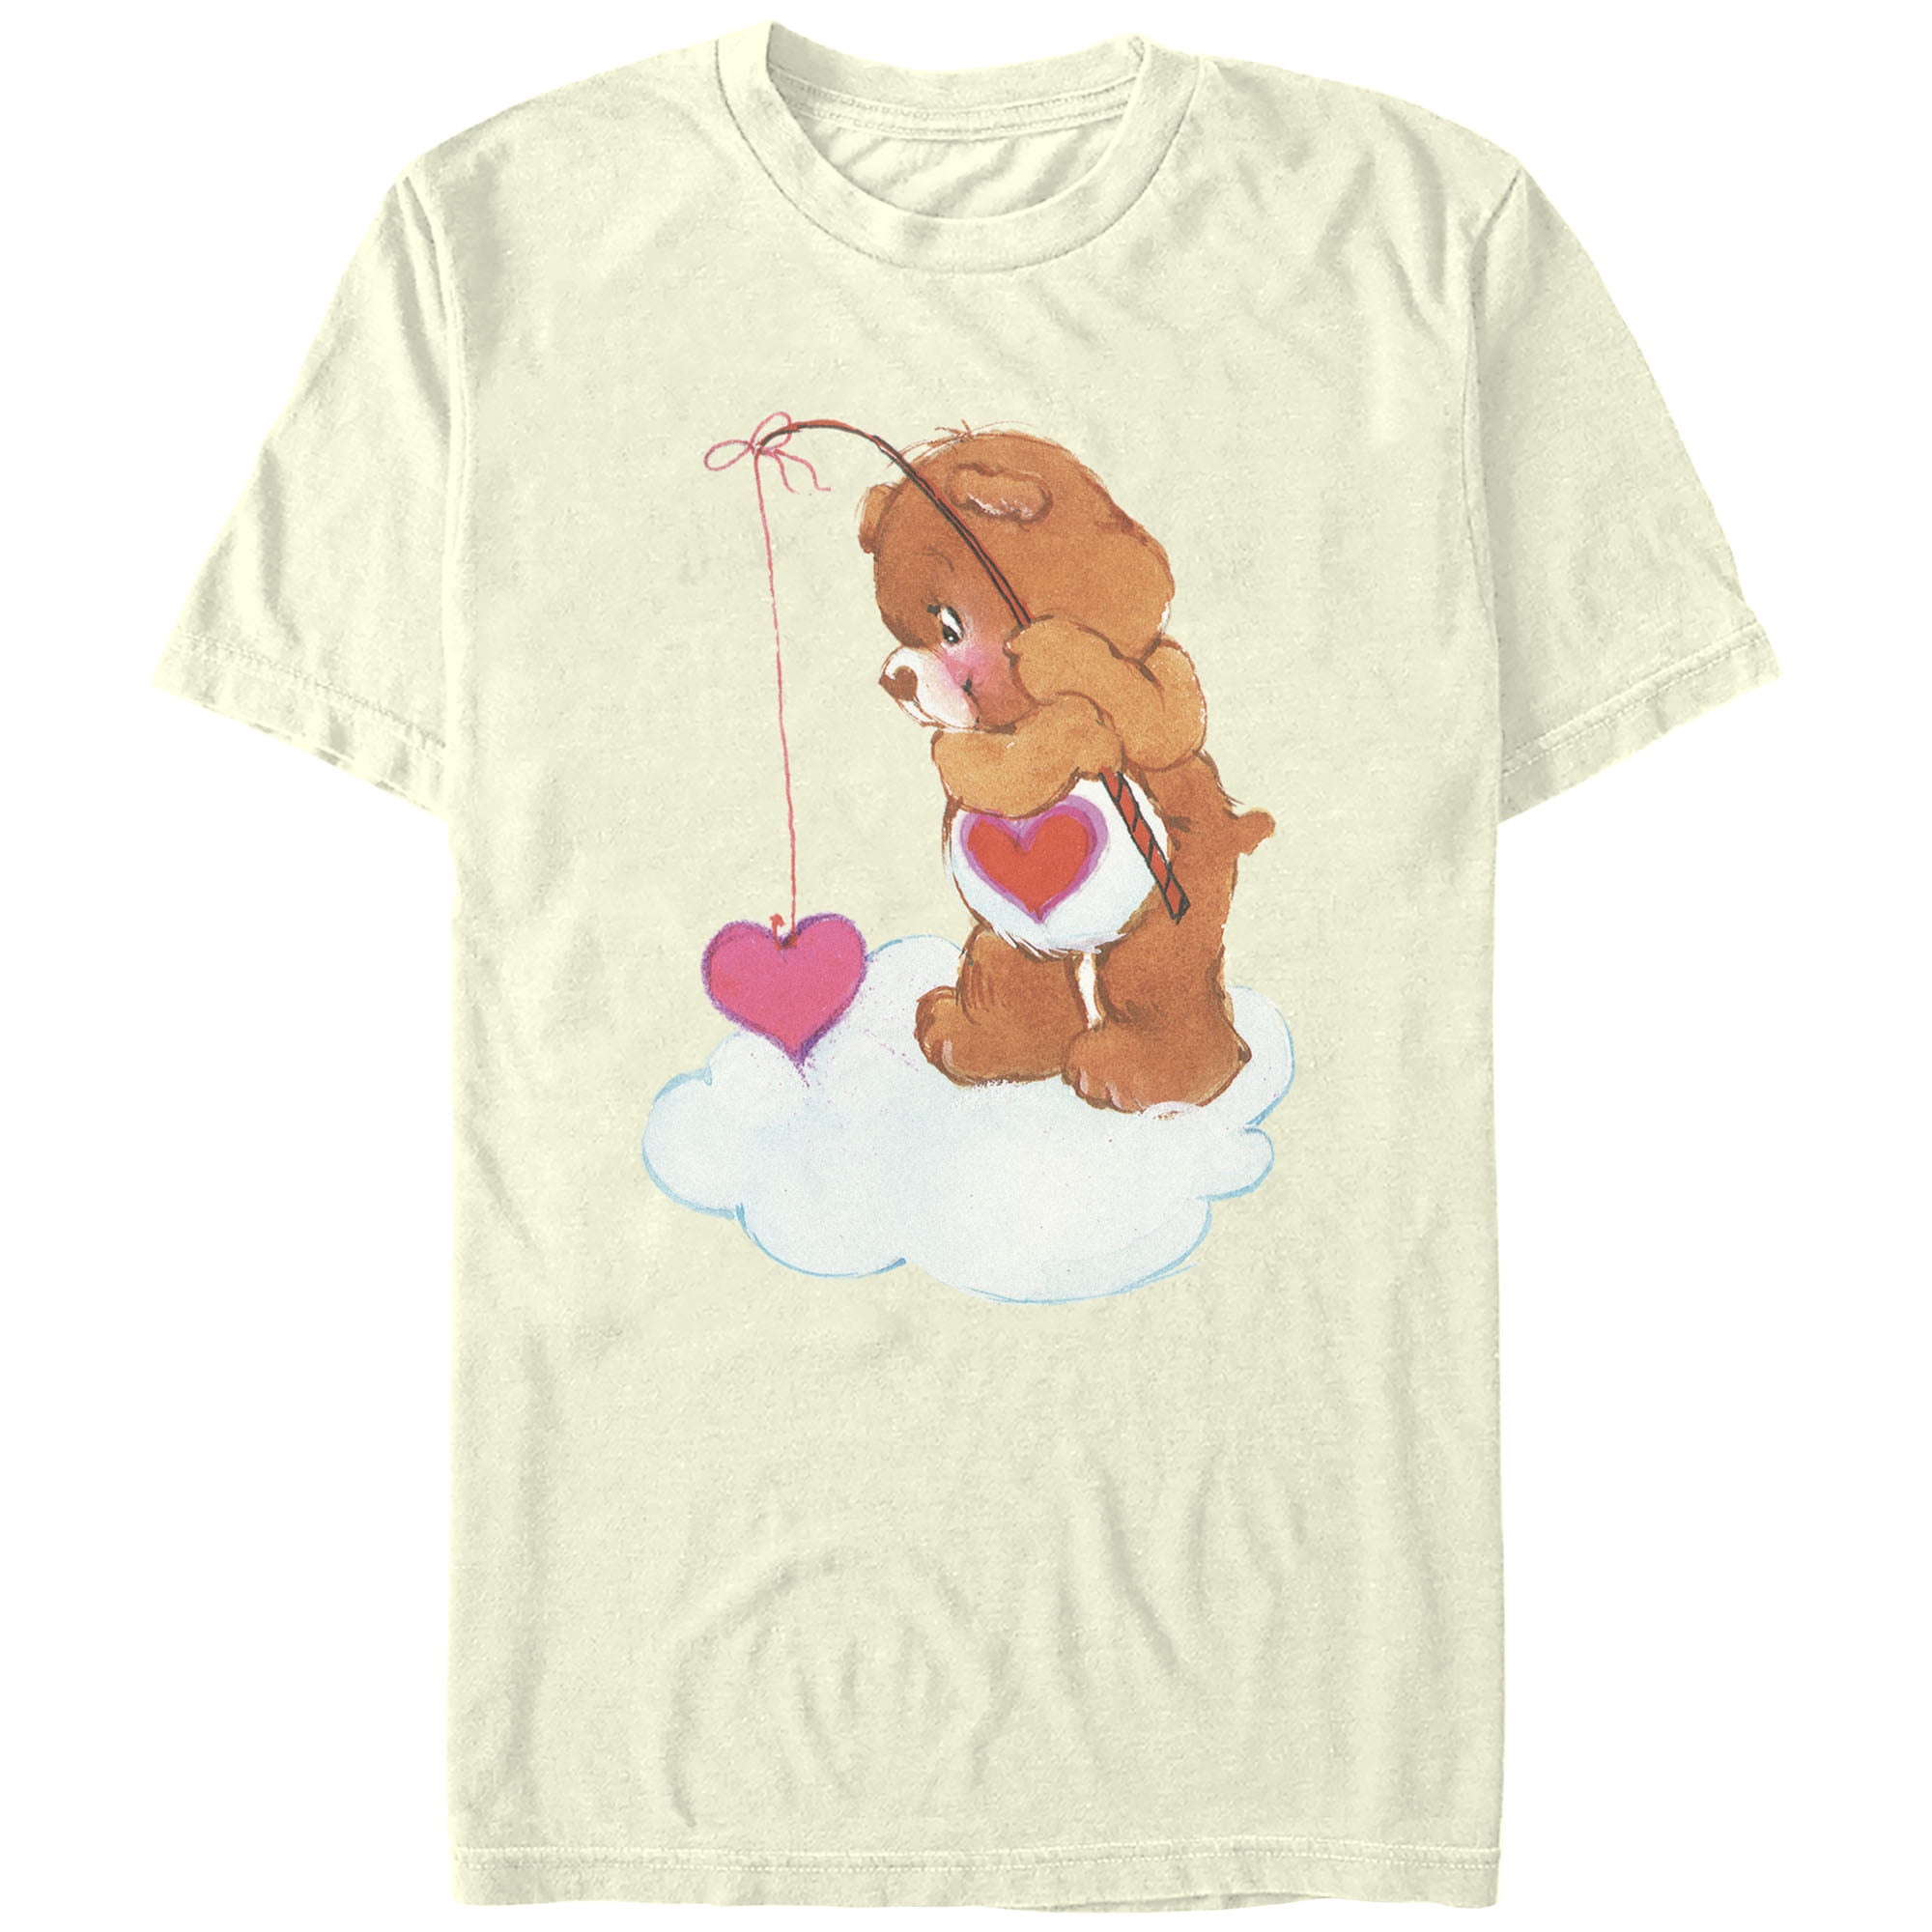 Men's Care Bears Fishing Hearts Graphic Tee Beige Large 